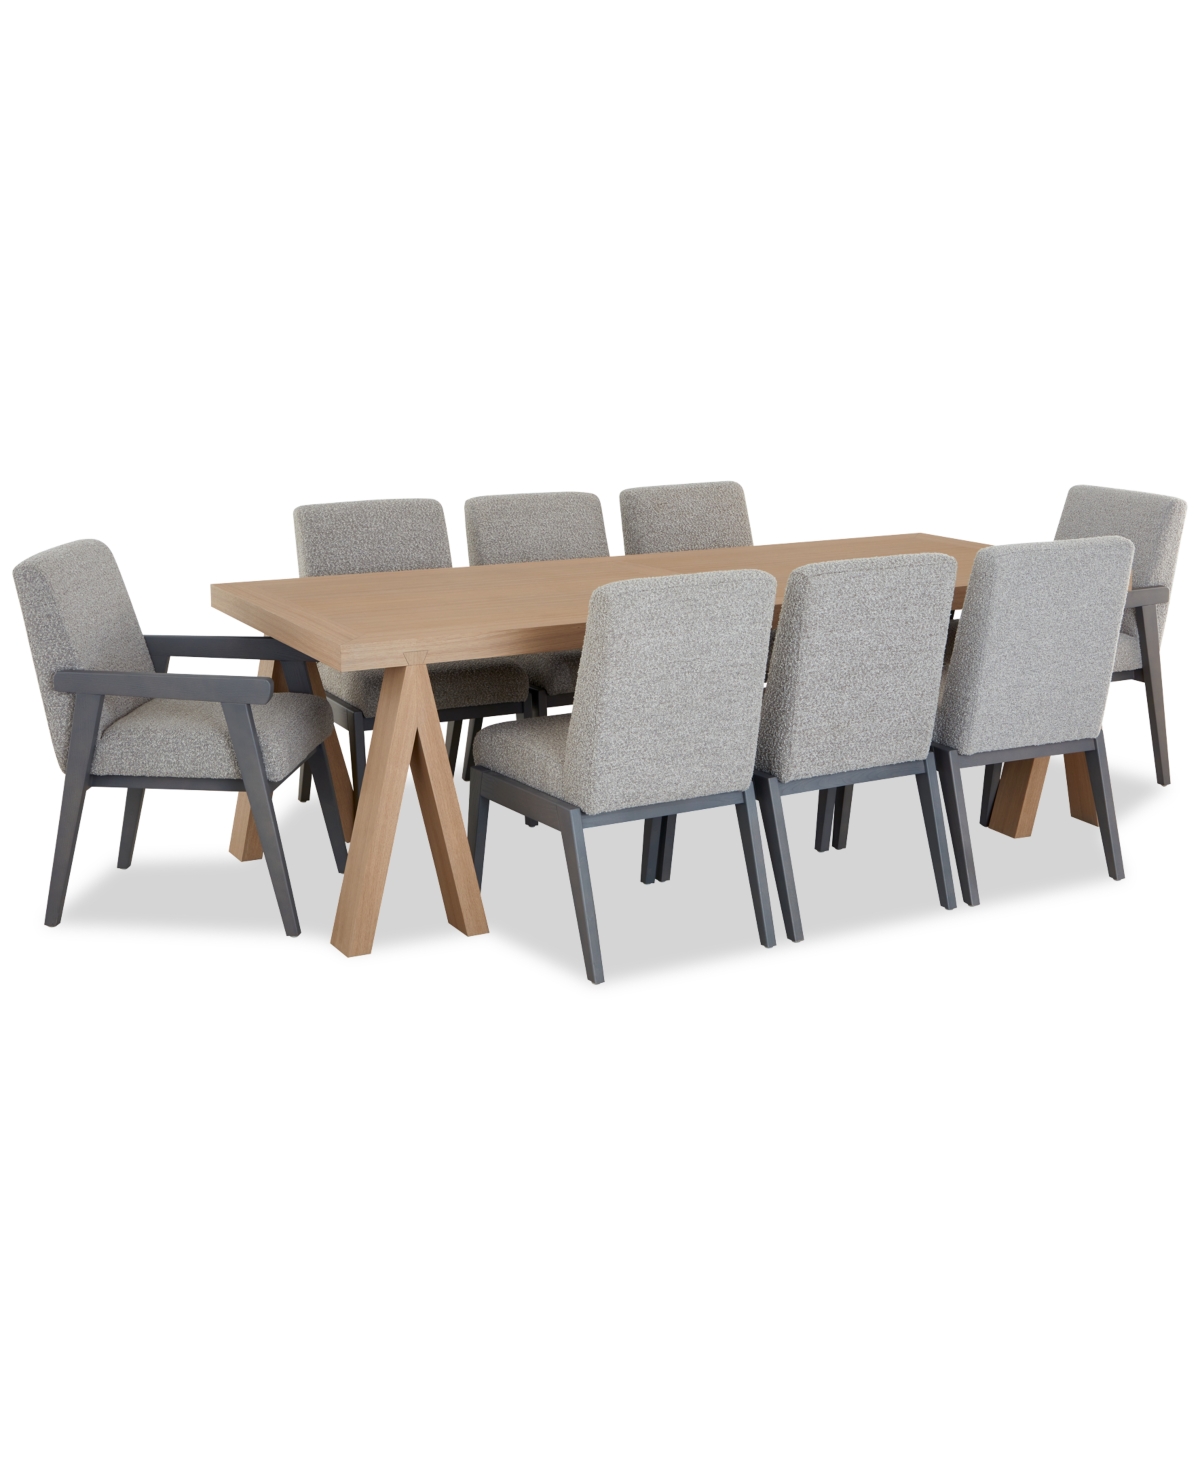 Drexel Atwell 9pc Dining Set (table + 6 Side Chairs + 2 Arm Chairs) In No Color